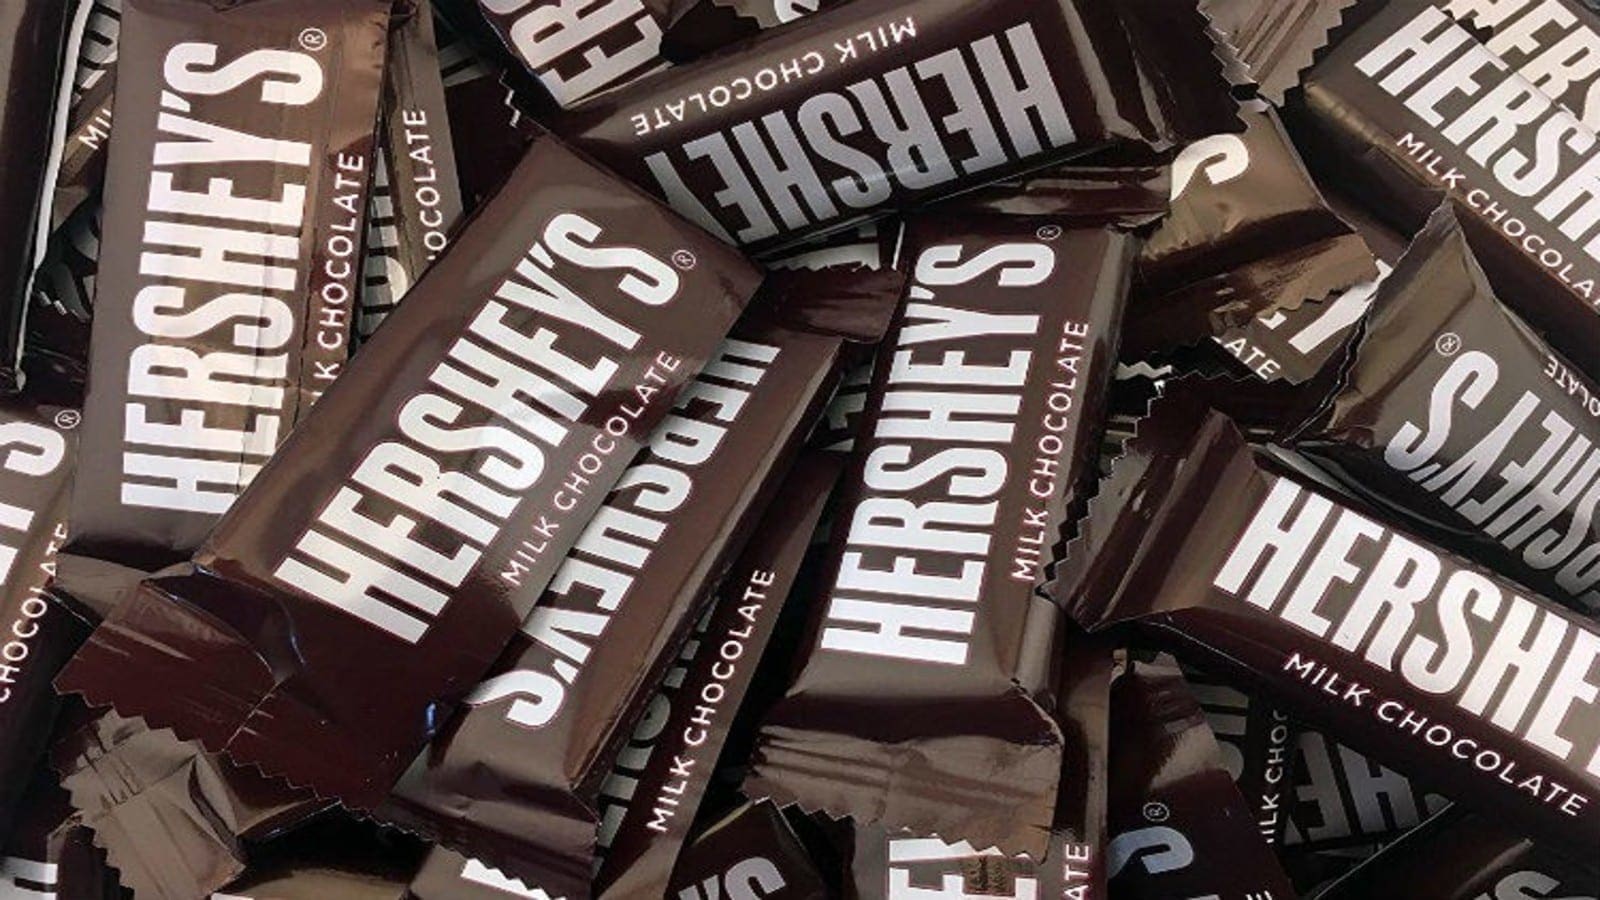 Hershey breaks ground new US facility to boost supply chain, fuel future growth